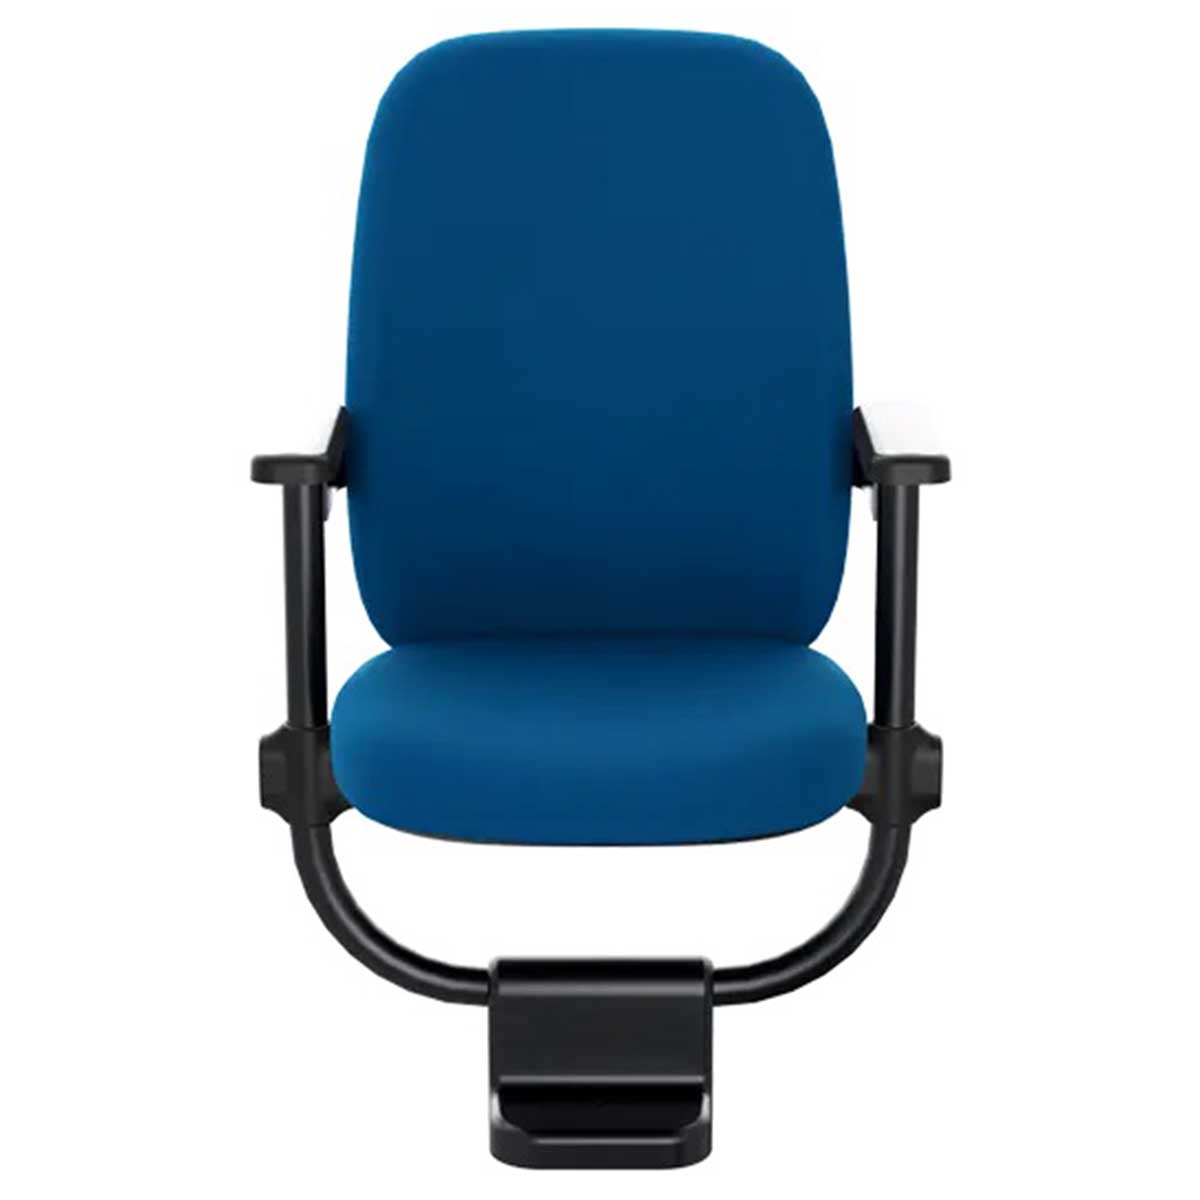 Push Back Chair Manufacturers, Suppliers in Aerocity